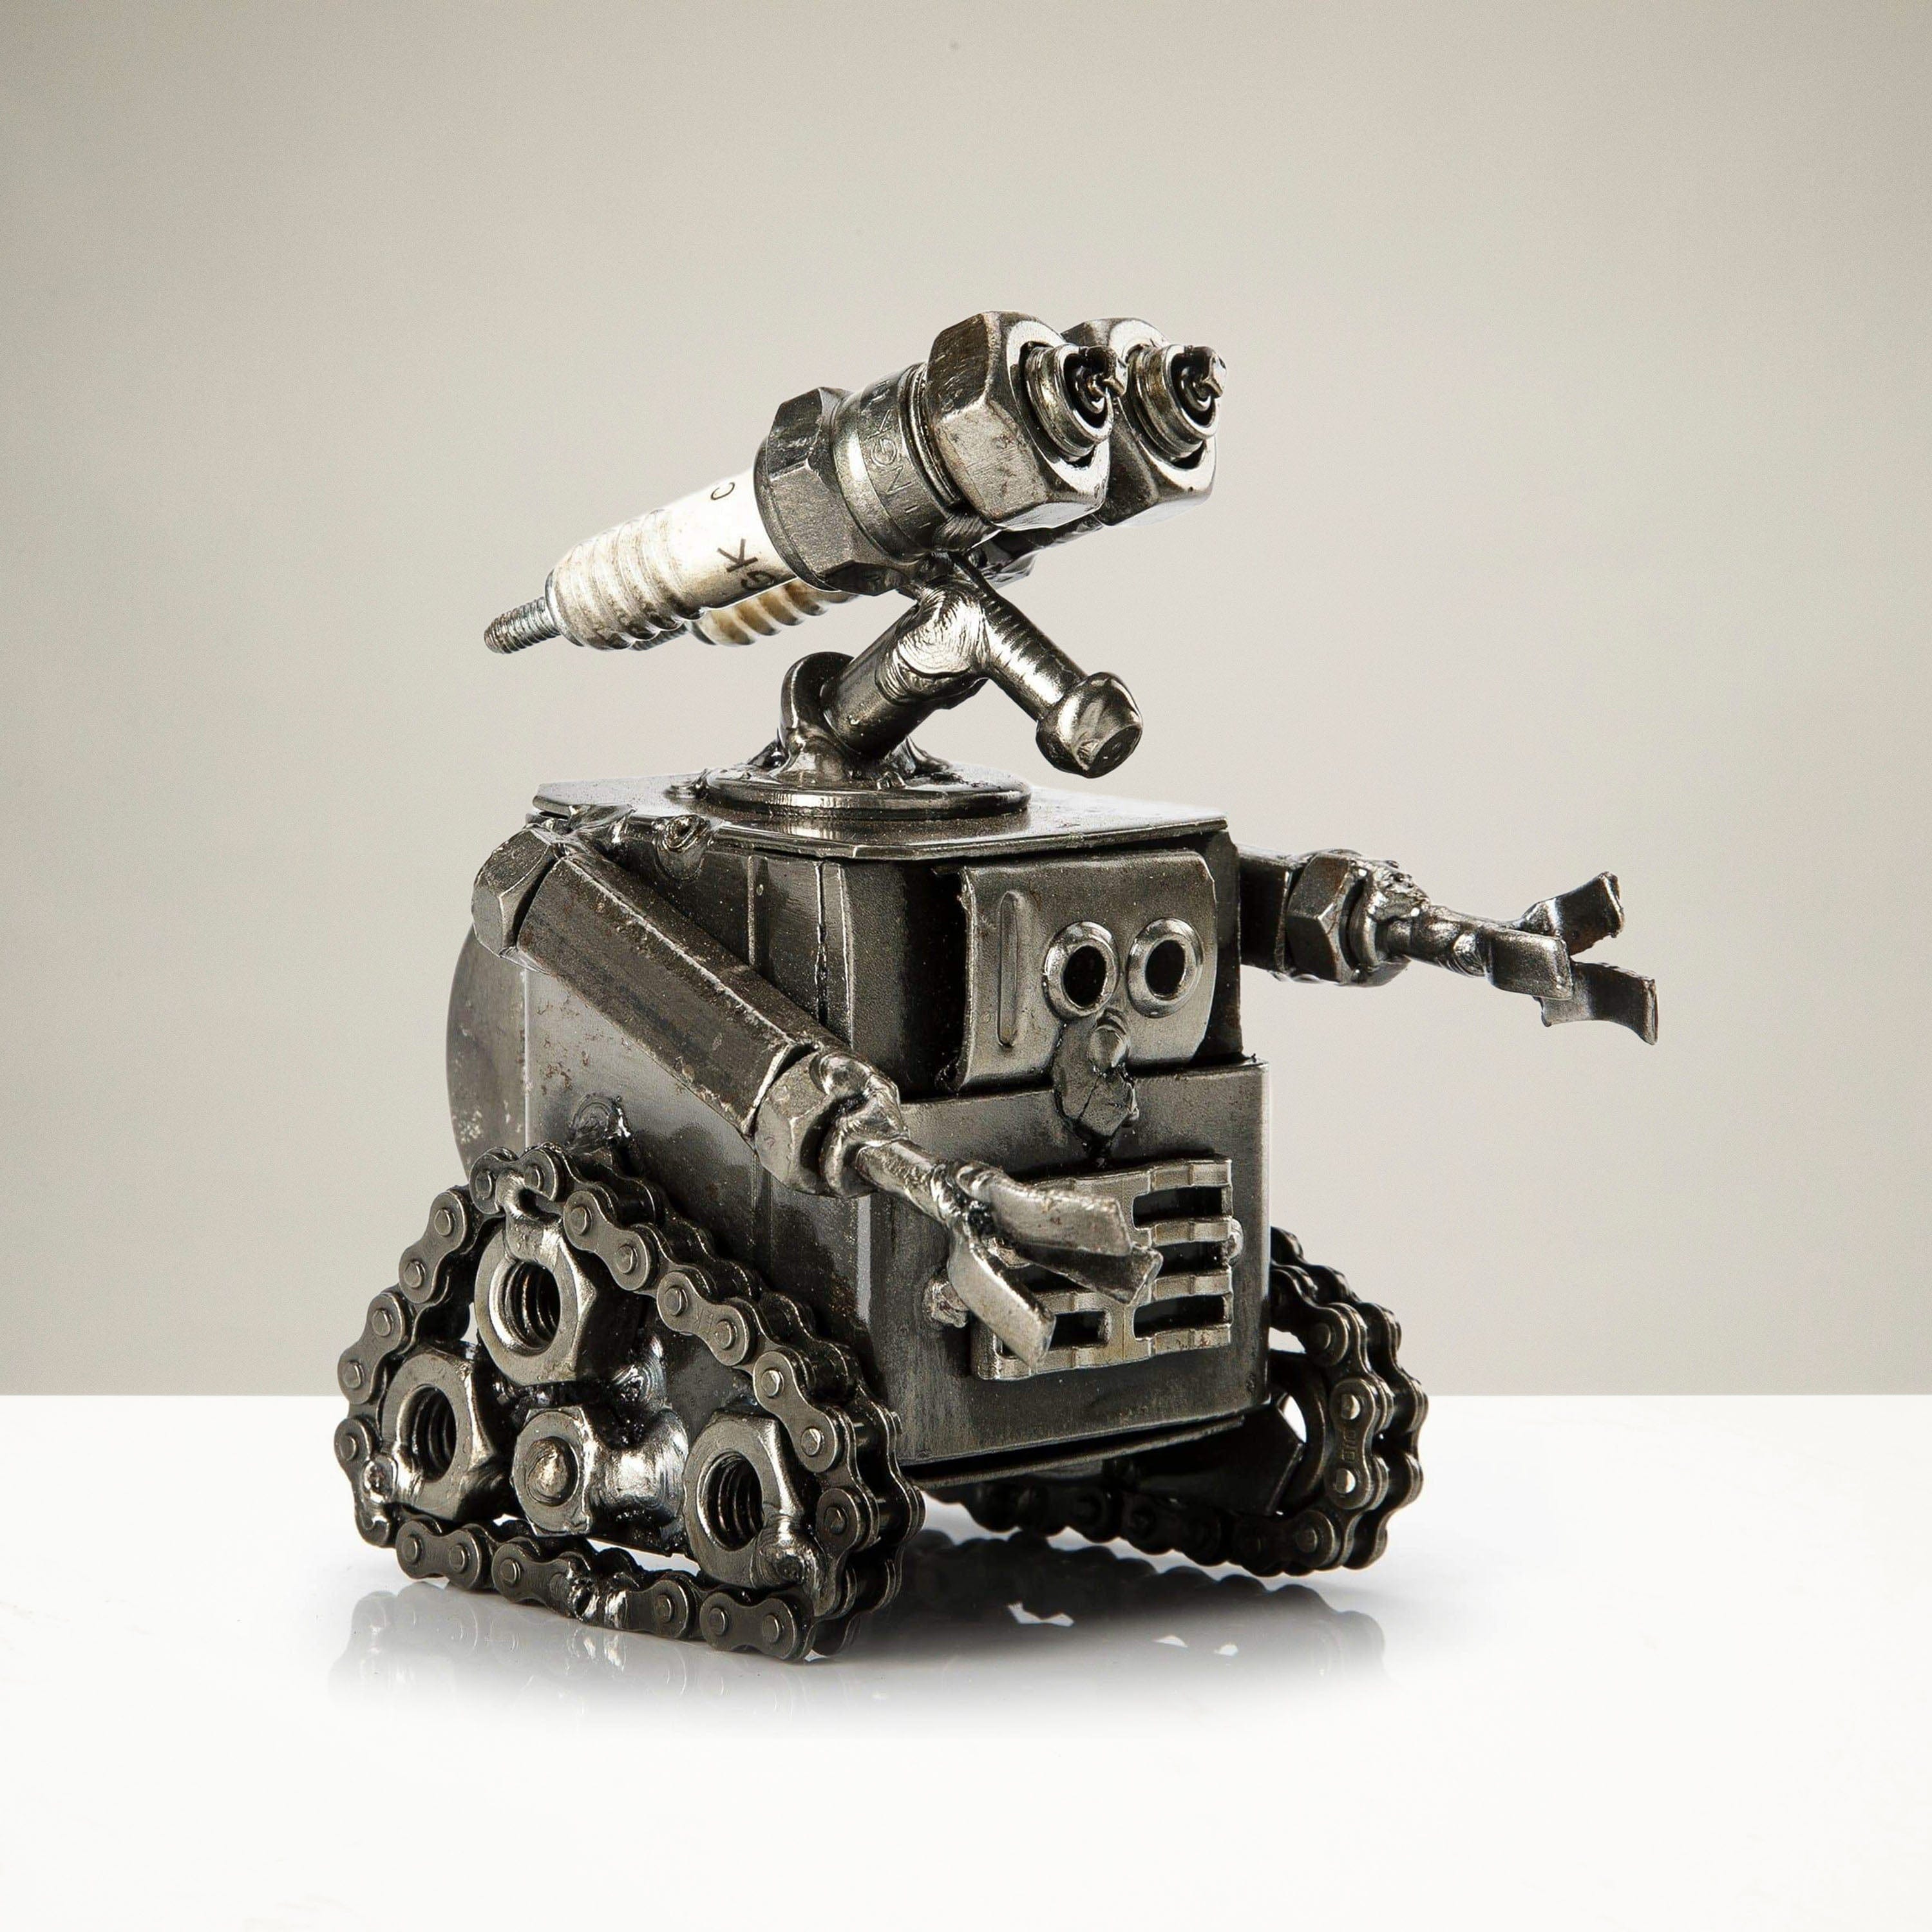 Kalifano Recycled Metal Art 4" Wall-E Inspired Recycled Metal Sculpture RMS-250WE-N